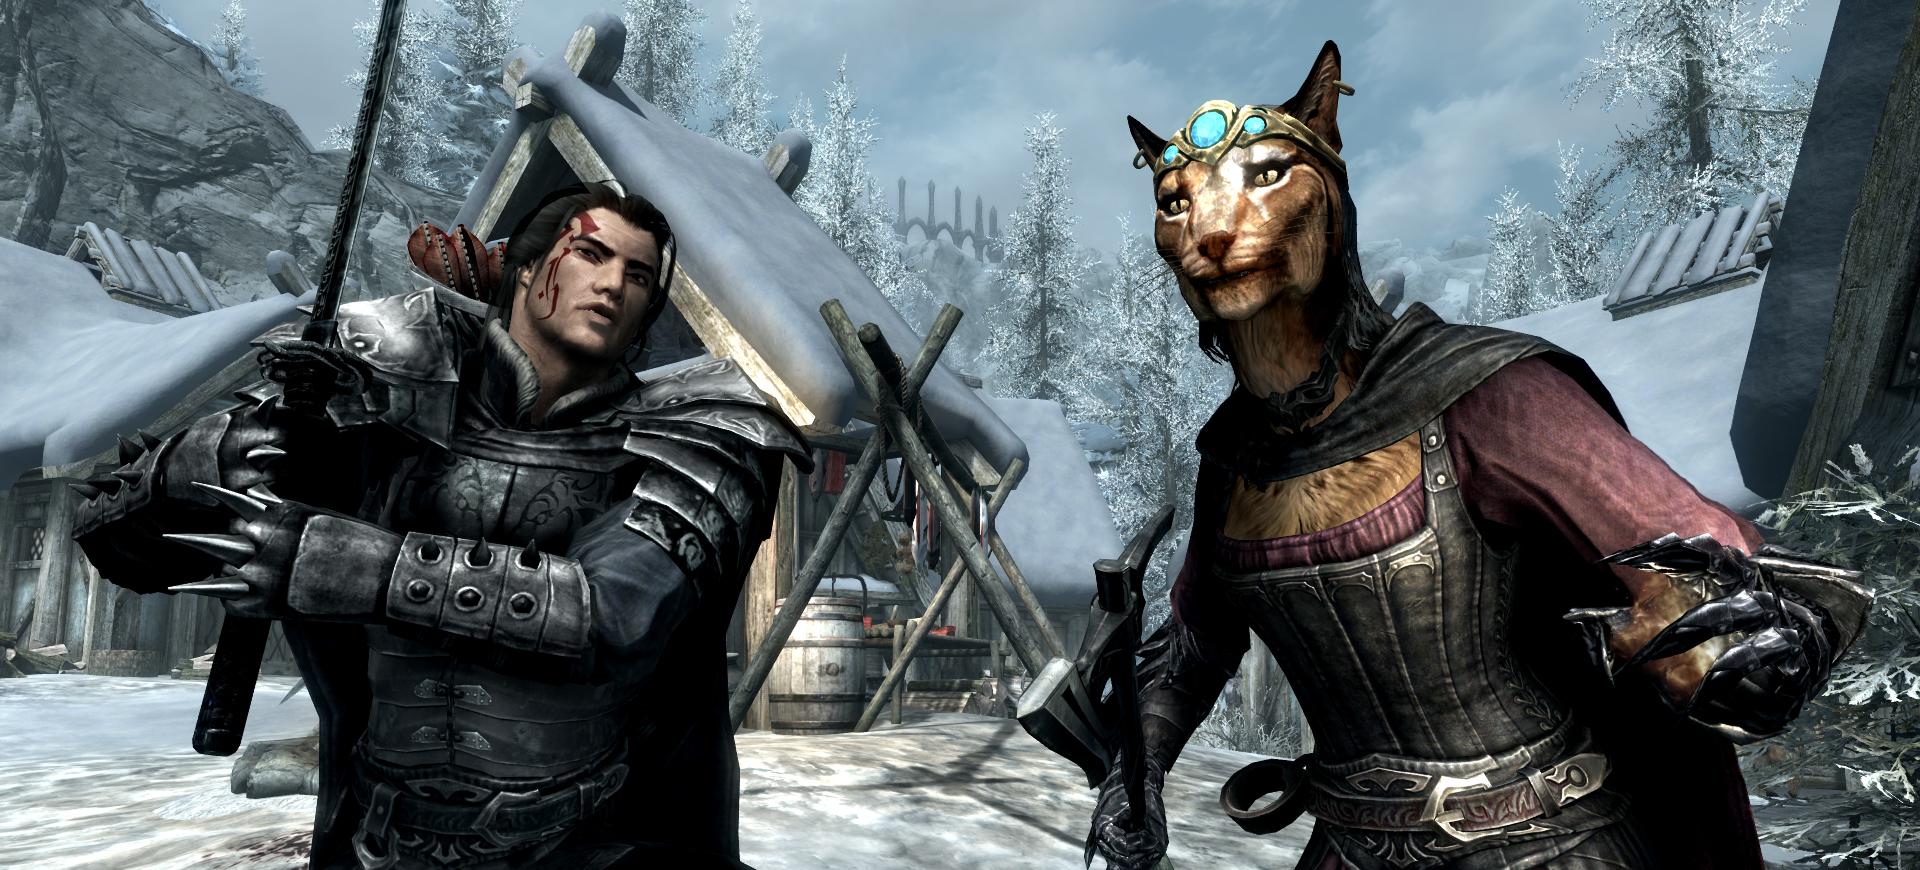 how to add mods to skyrim pc